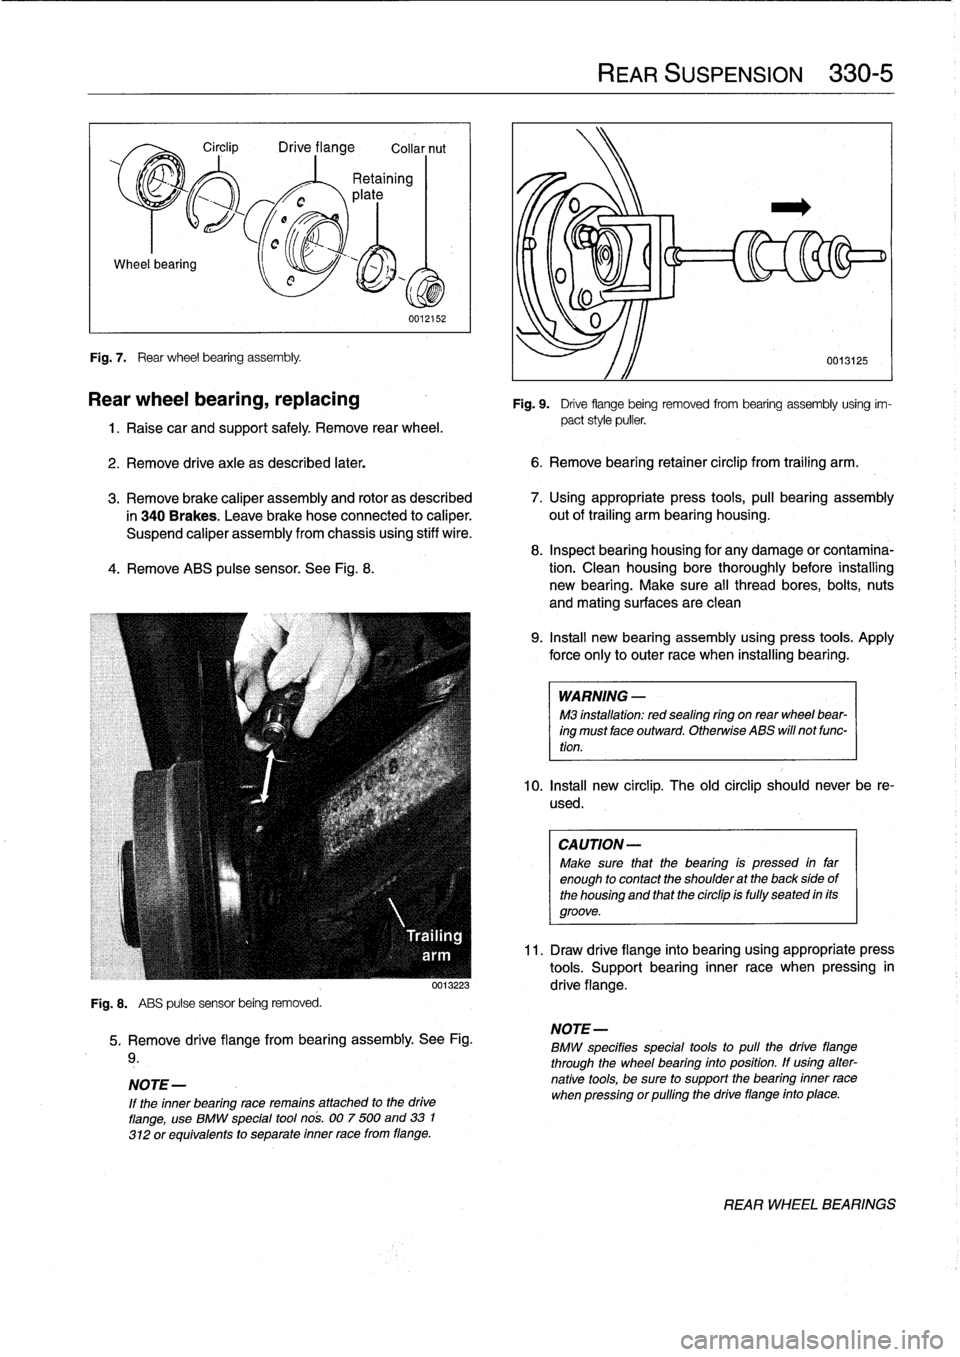 BMW 323i 1995 E36 Owners Manual Wheel
bearing

Fig
.
7
.

	

Rear
wheel
bearing
assembly
.

Circlip

	

Drive
flange

	

Collar
nut

0012152

Rear
wheel
bearing,
replacing

1
.
Raise
car
and
support
safely
.
Remove
rear
wheel
.

2
.